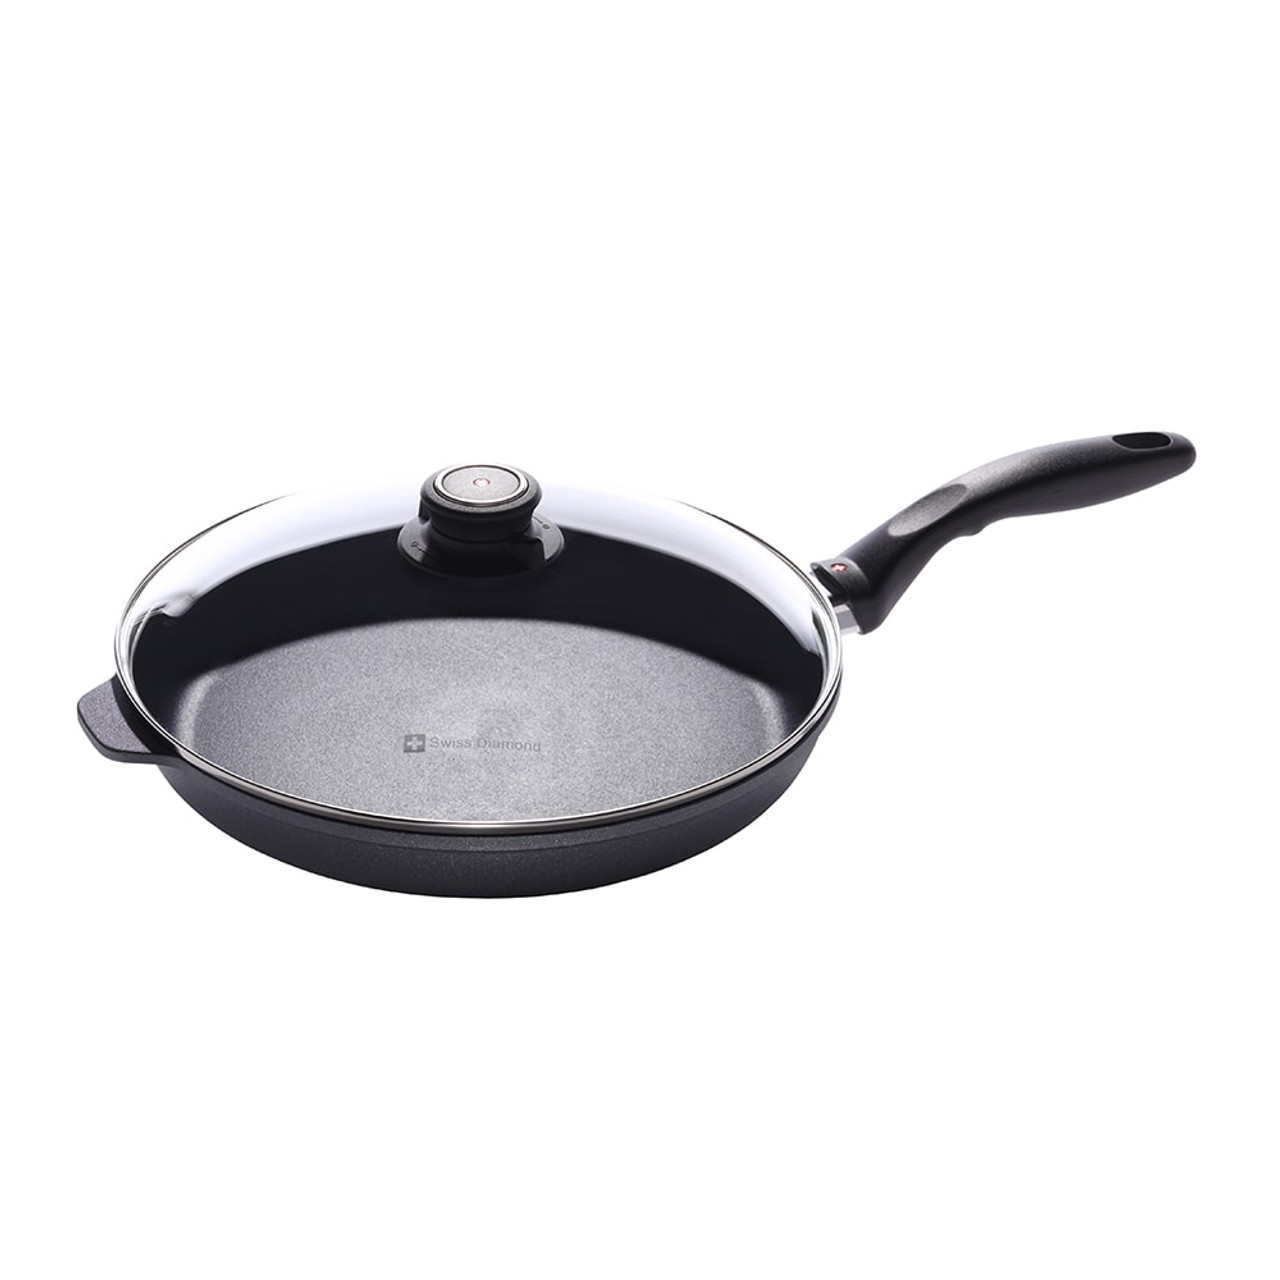 https://cdn11.bigcommerce.com/s-hccytny0od/images/stencil/1280x1280/products/443/2644/swiss-diamond-nonstick-fry-pan-with-lid-11-inch__43095.1597356558.jpg?c=2?imbypass=on